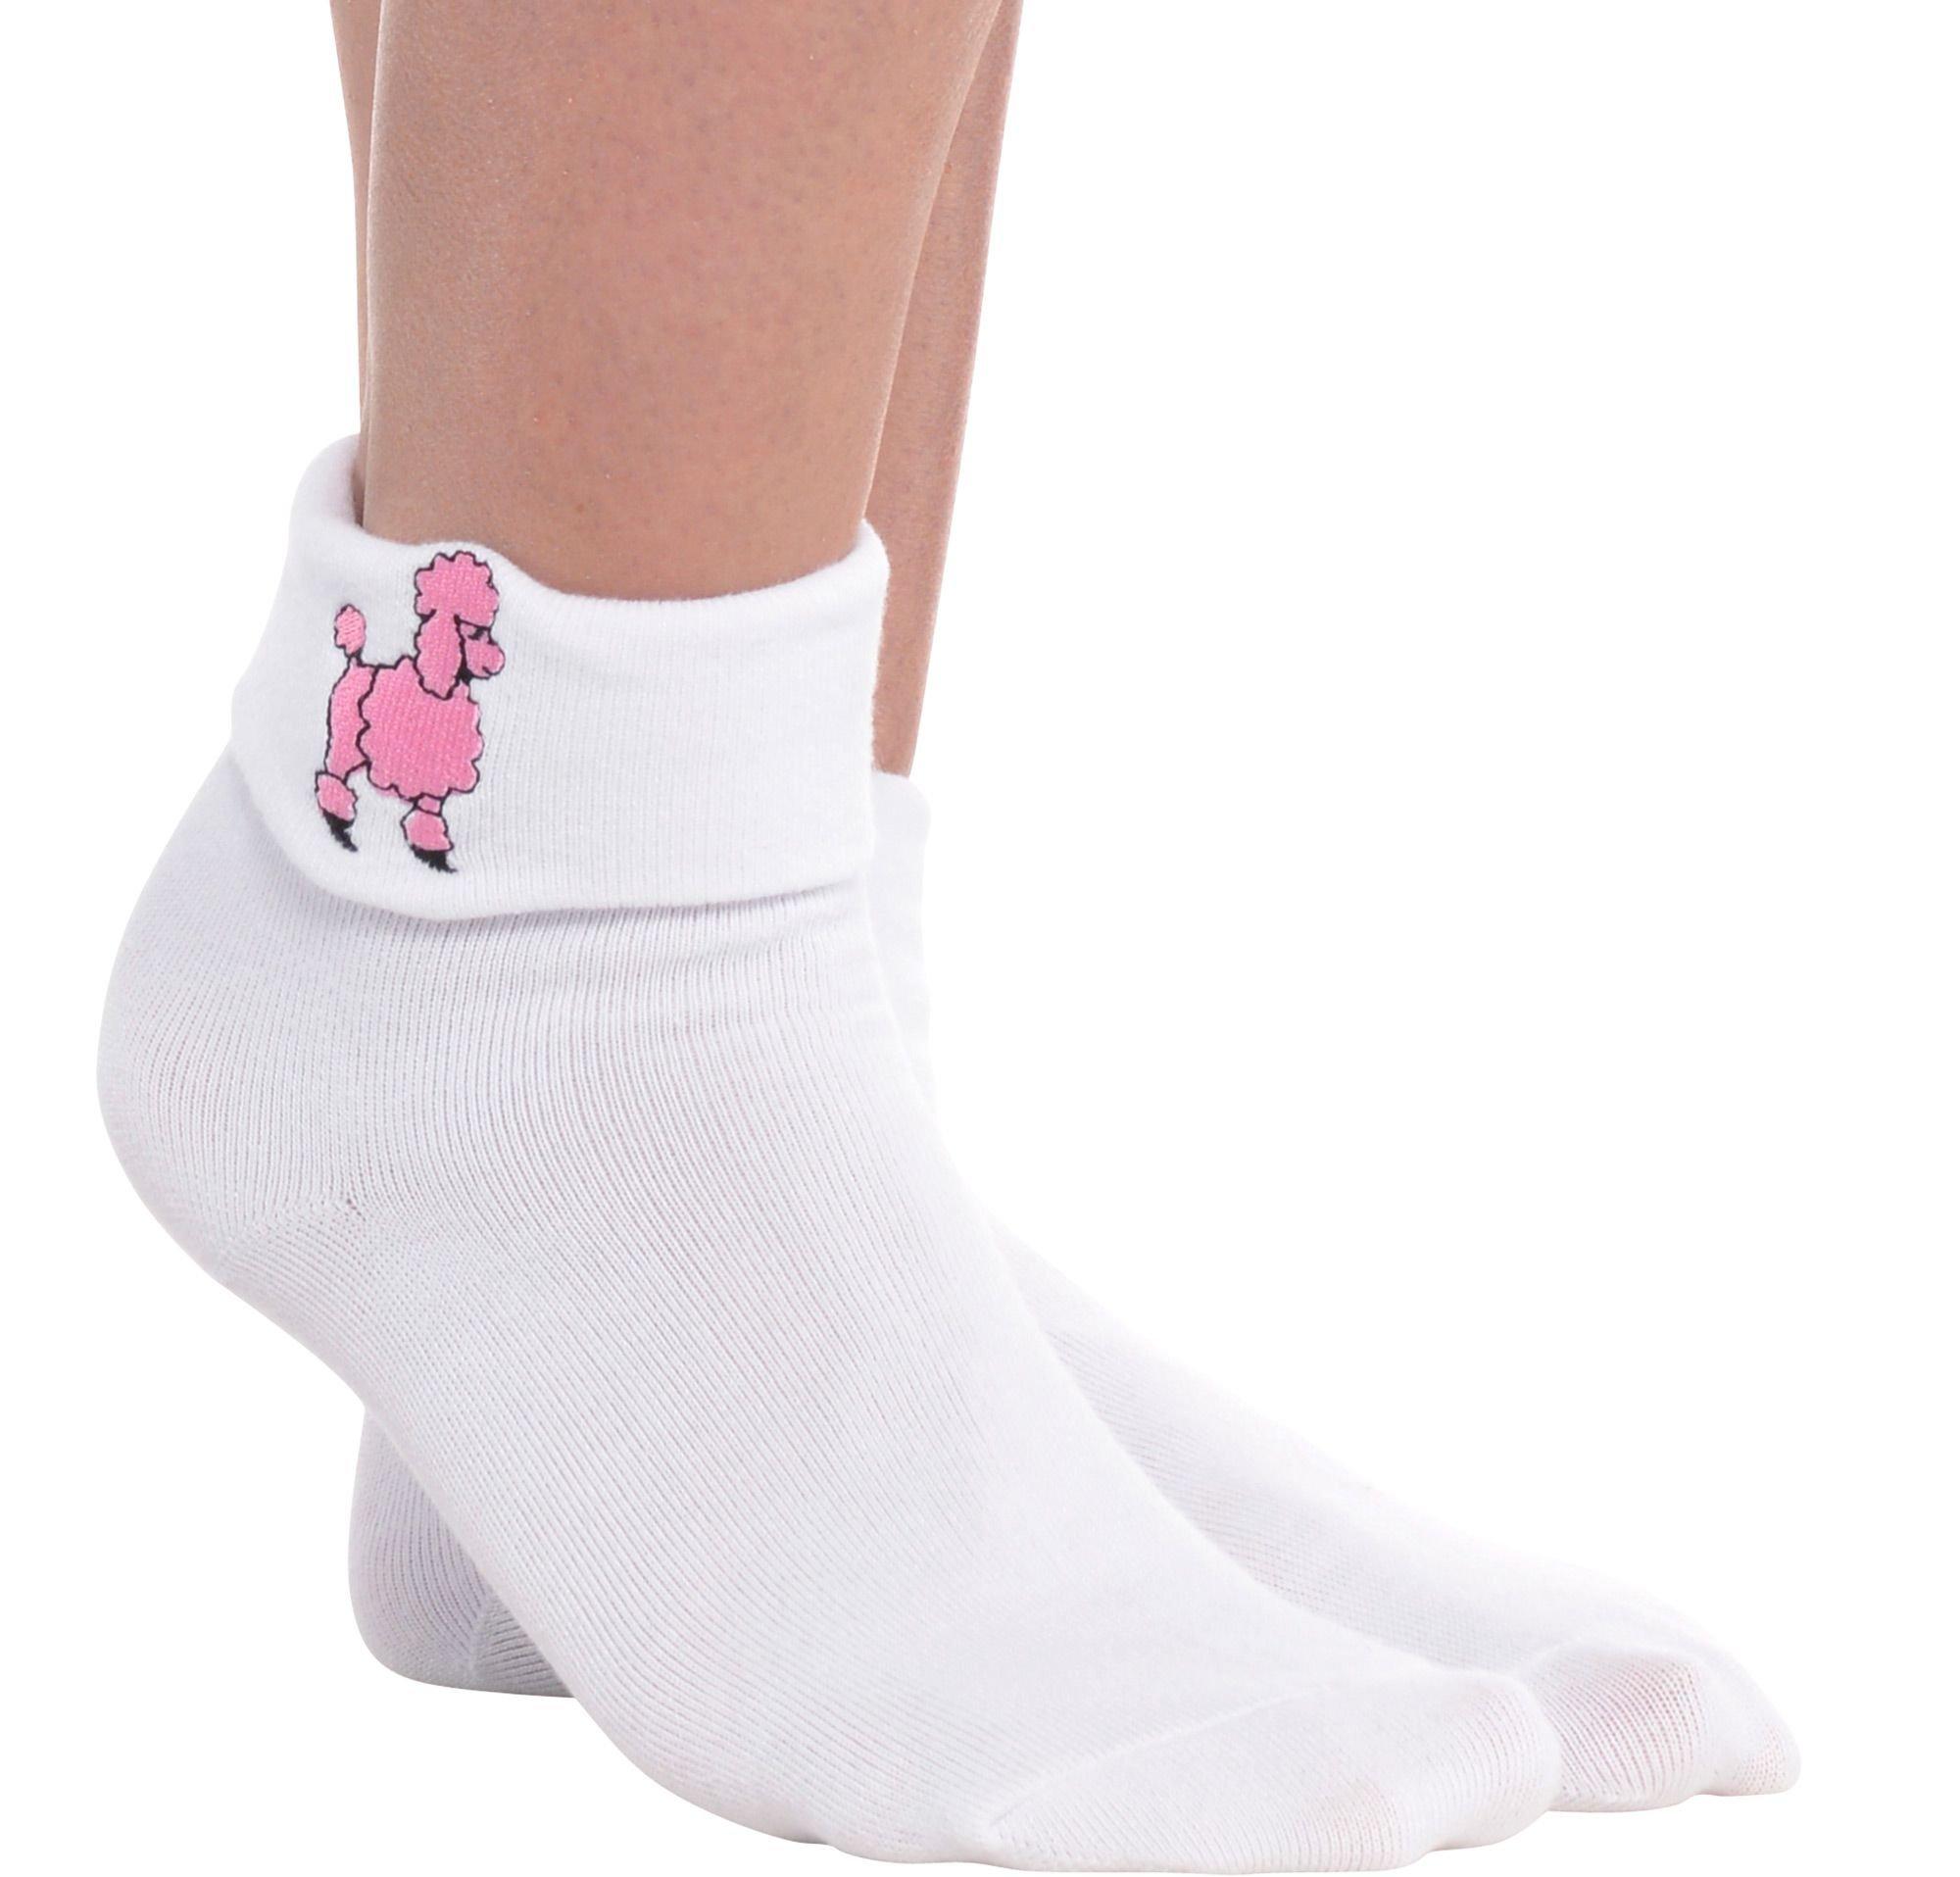 White Poodle Socks, One Size Fits Most, Mardel